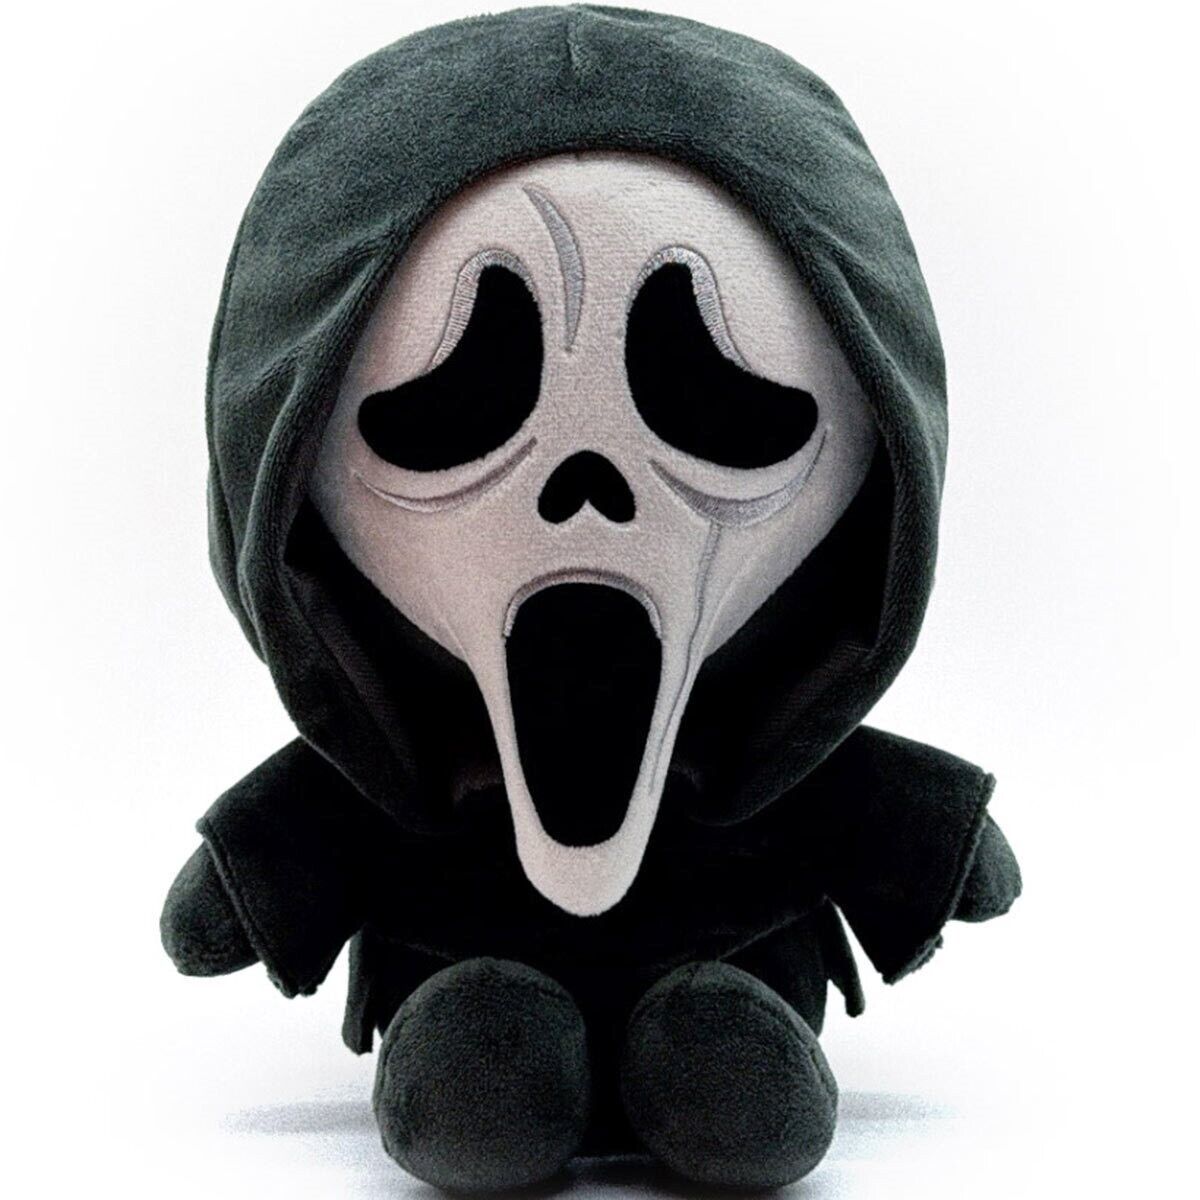 *New* Youtooz Scream Ghost Face 9-in Plush Limited Edition Soft Plush Figure